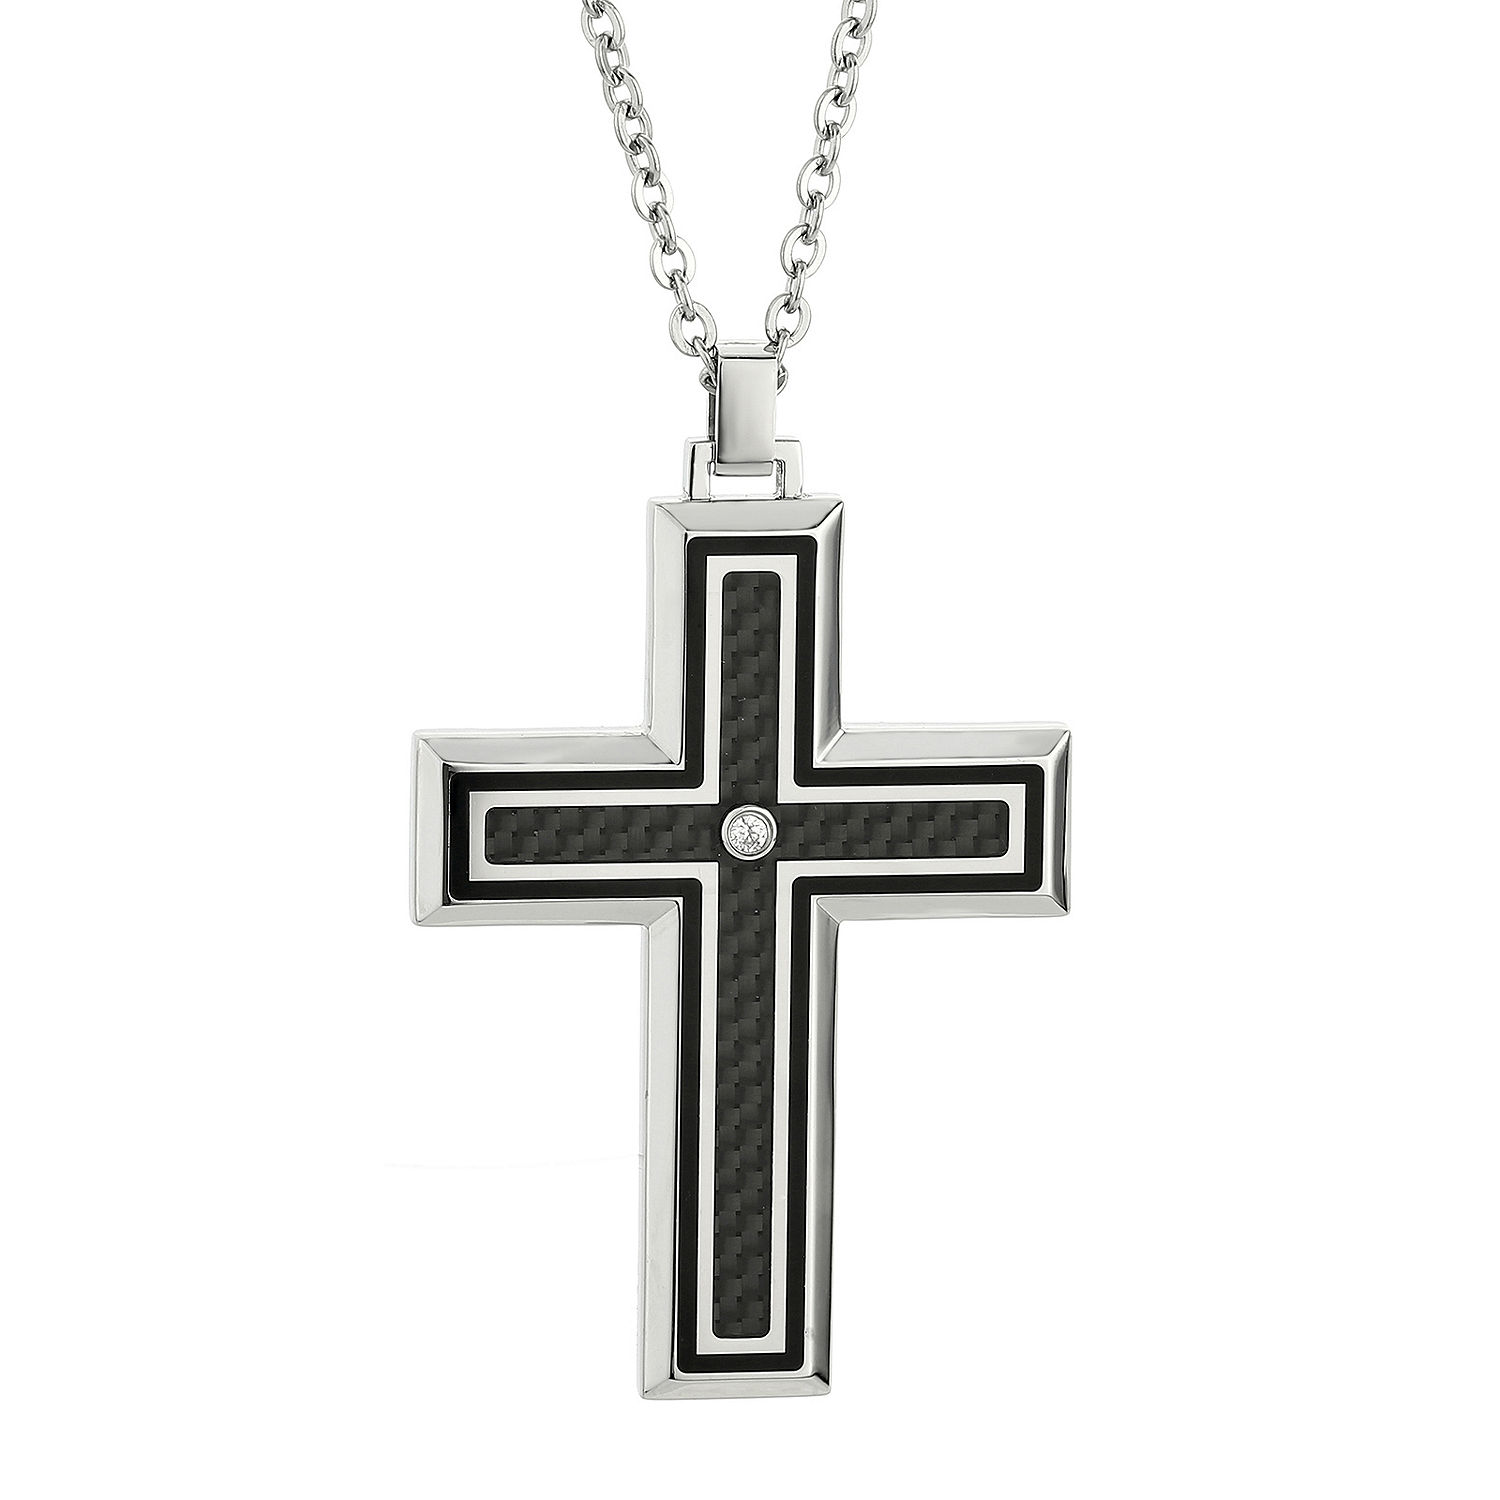 Mens Crystal Stainless Steel & Carbon Fiber Cross Pendant Necklace ...